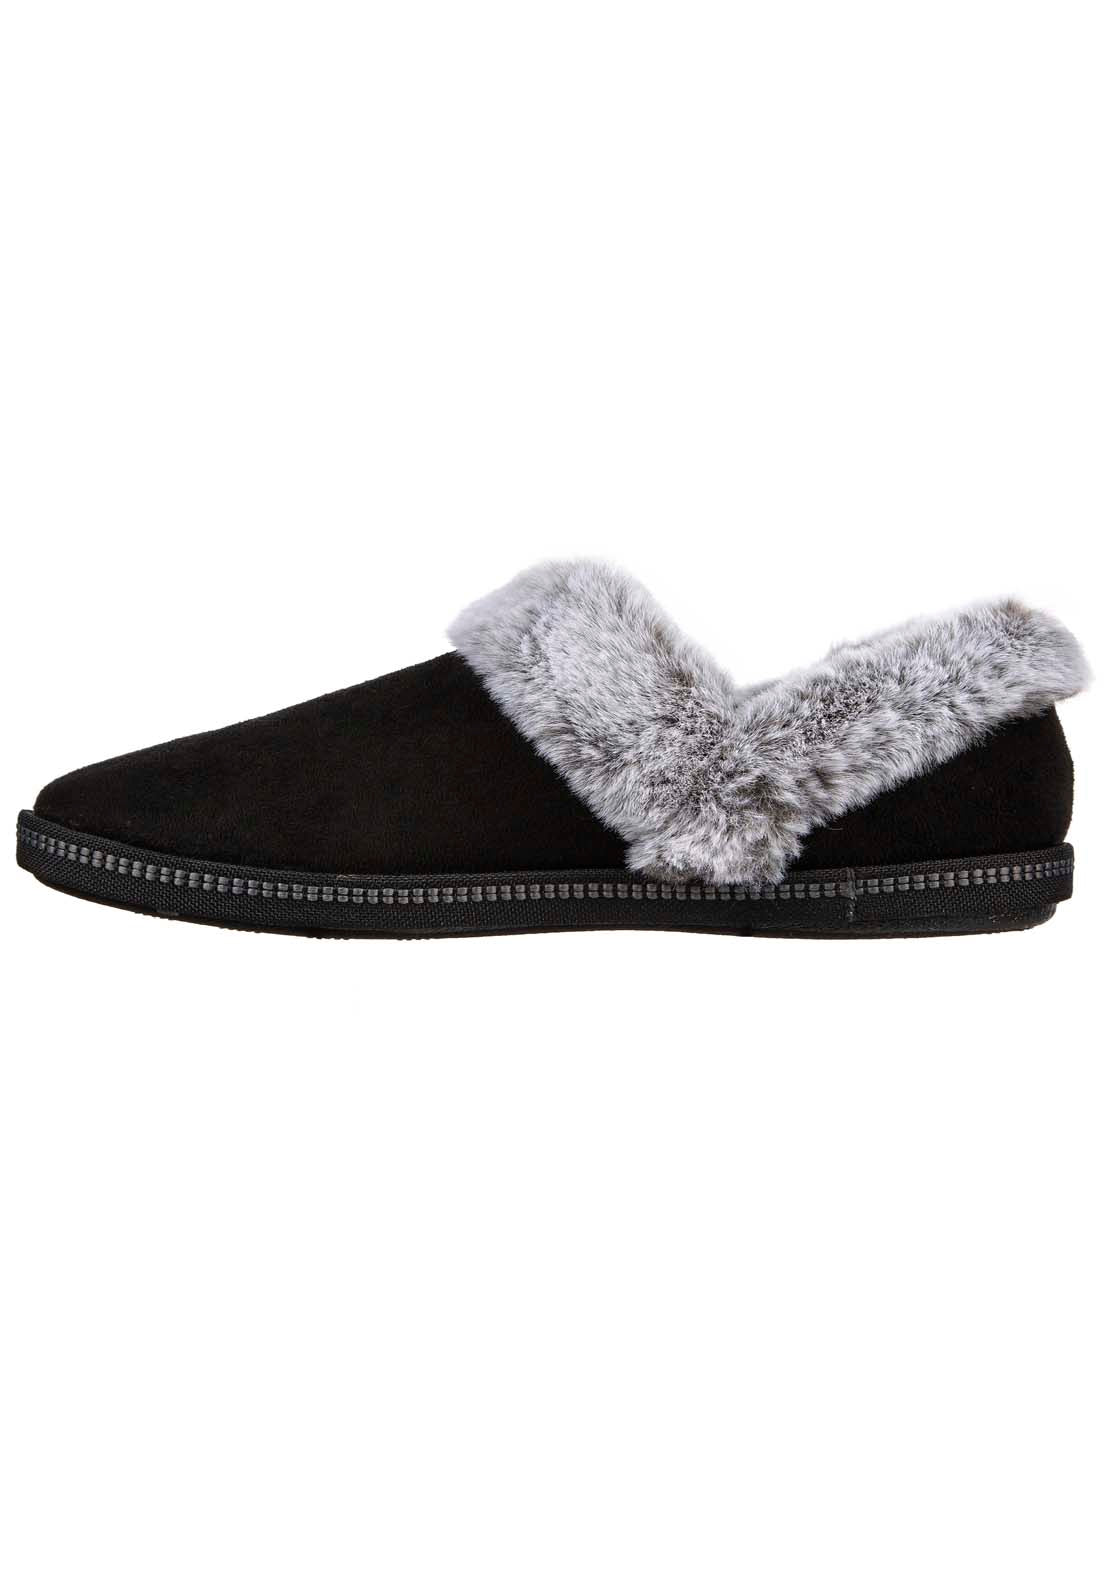 Skechers Cosy Campfire Slipper - Black 3 Shaws Department Stores